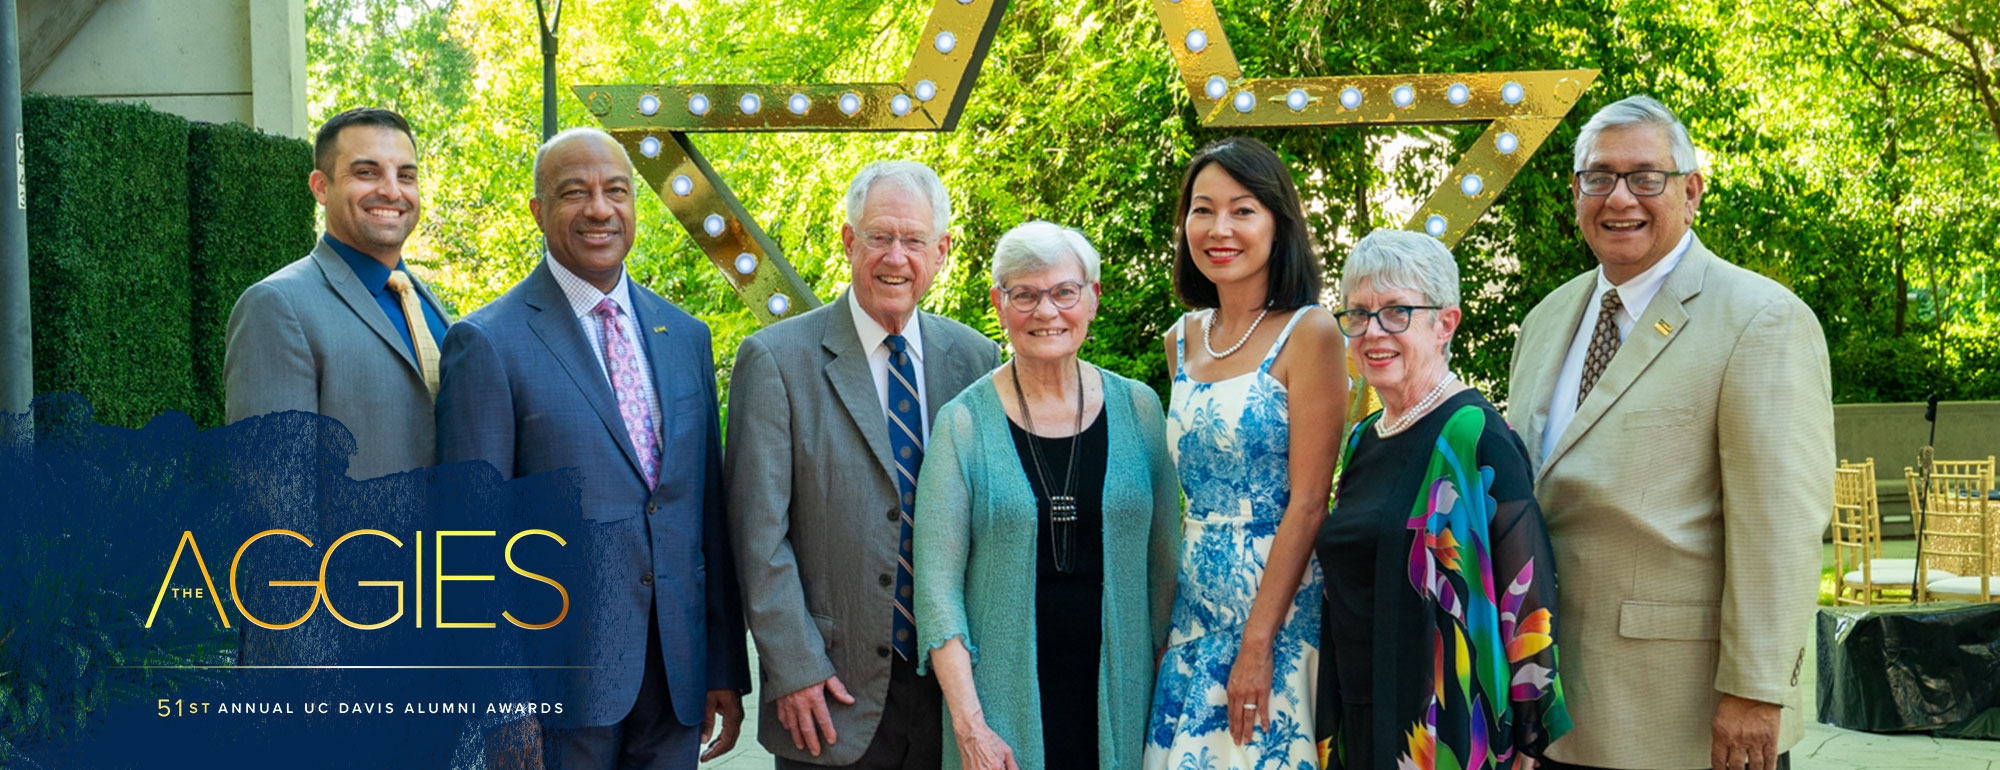 Chancellor Gary May and CAAA Board President Scott Judson pose with Alumni Award winners Bob and Cathy Kerr, Adriana Gascoigne, Sandy Reed, and Neptaly "Taty" Aguilera in front of a large gold marquee archway..